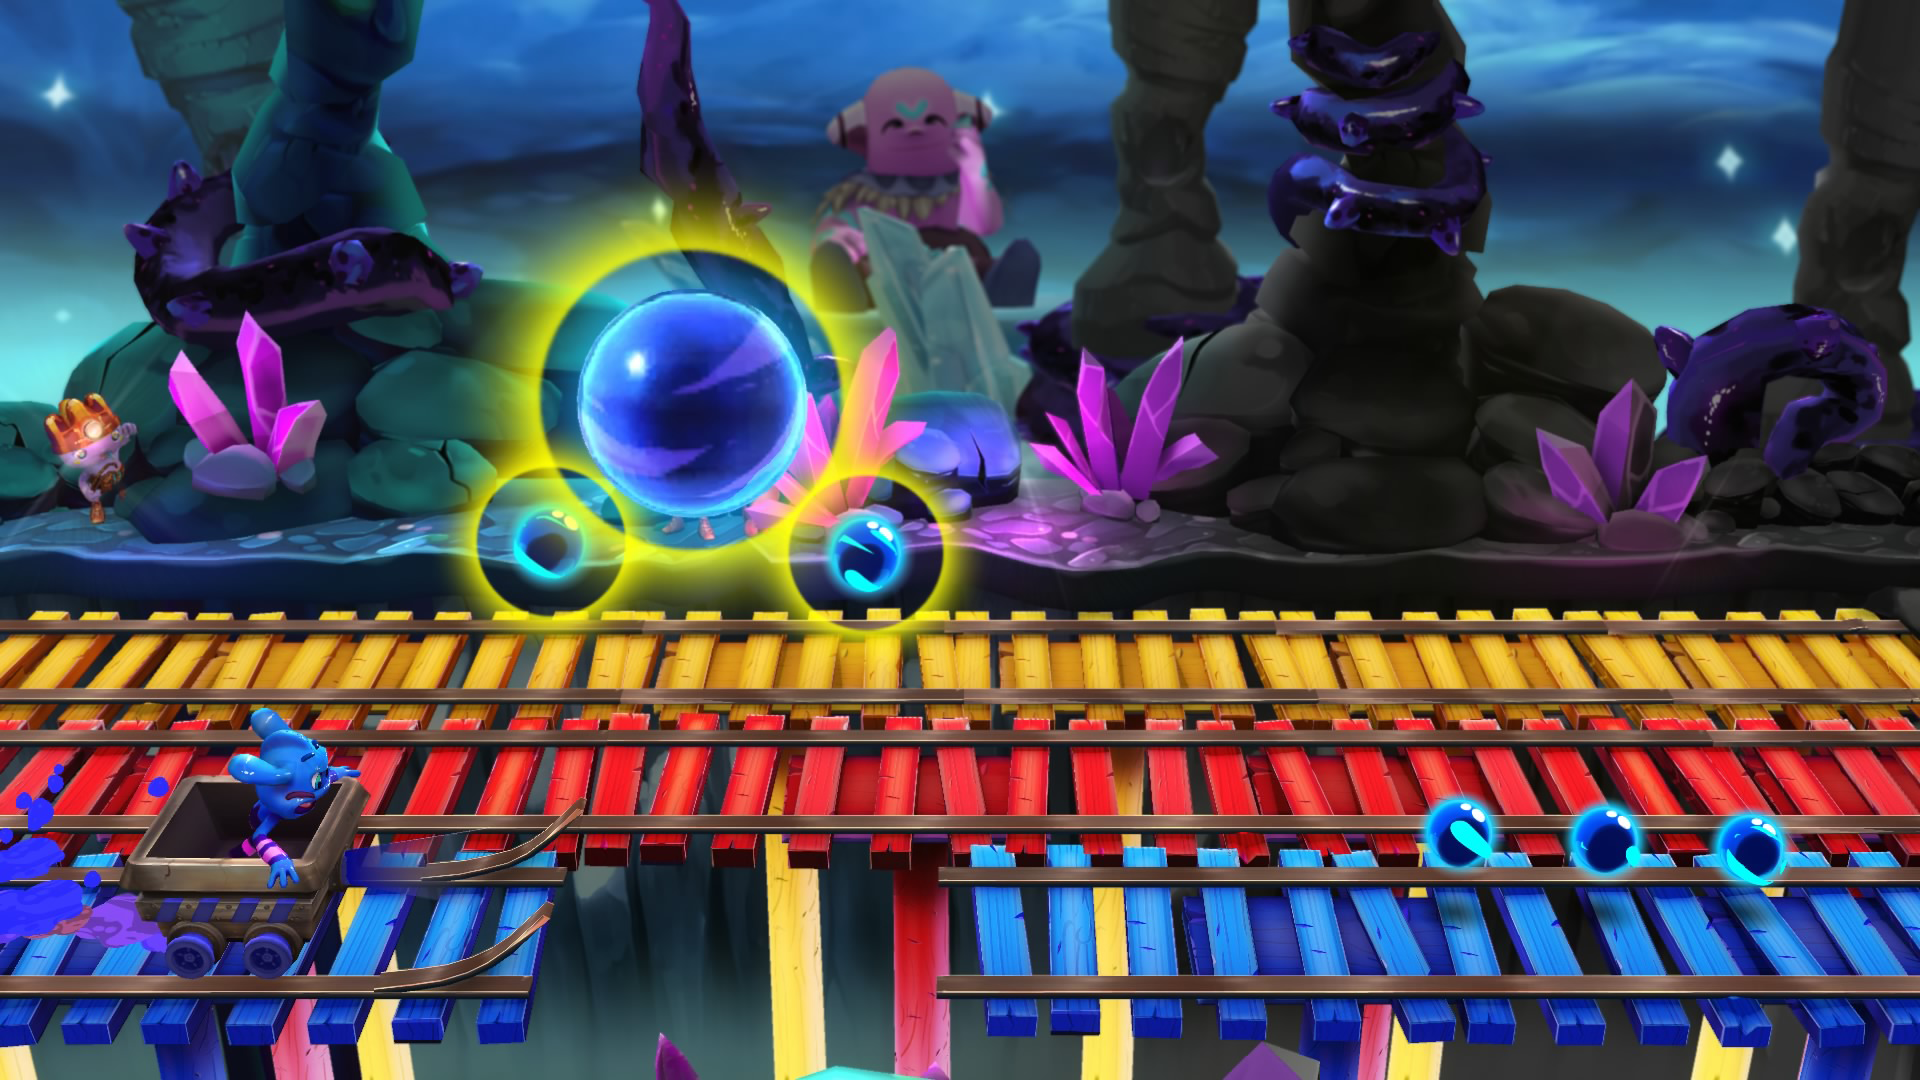 GDC 2015: Hands on With Color Guardians